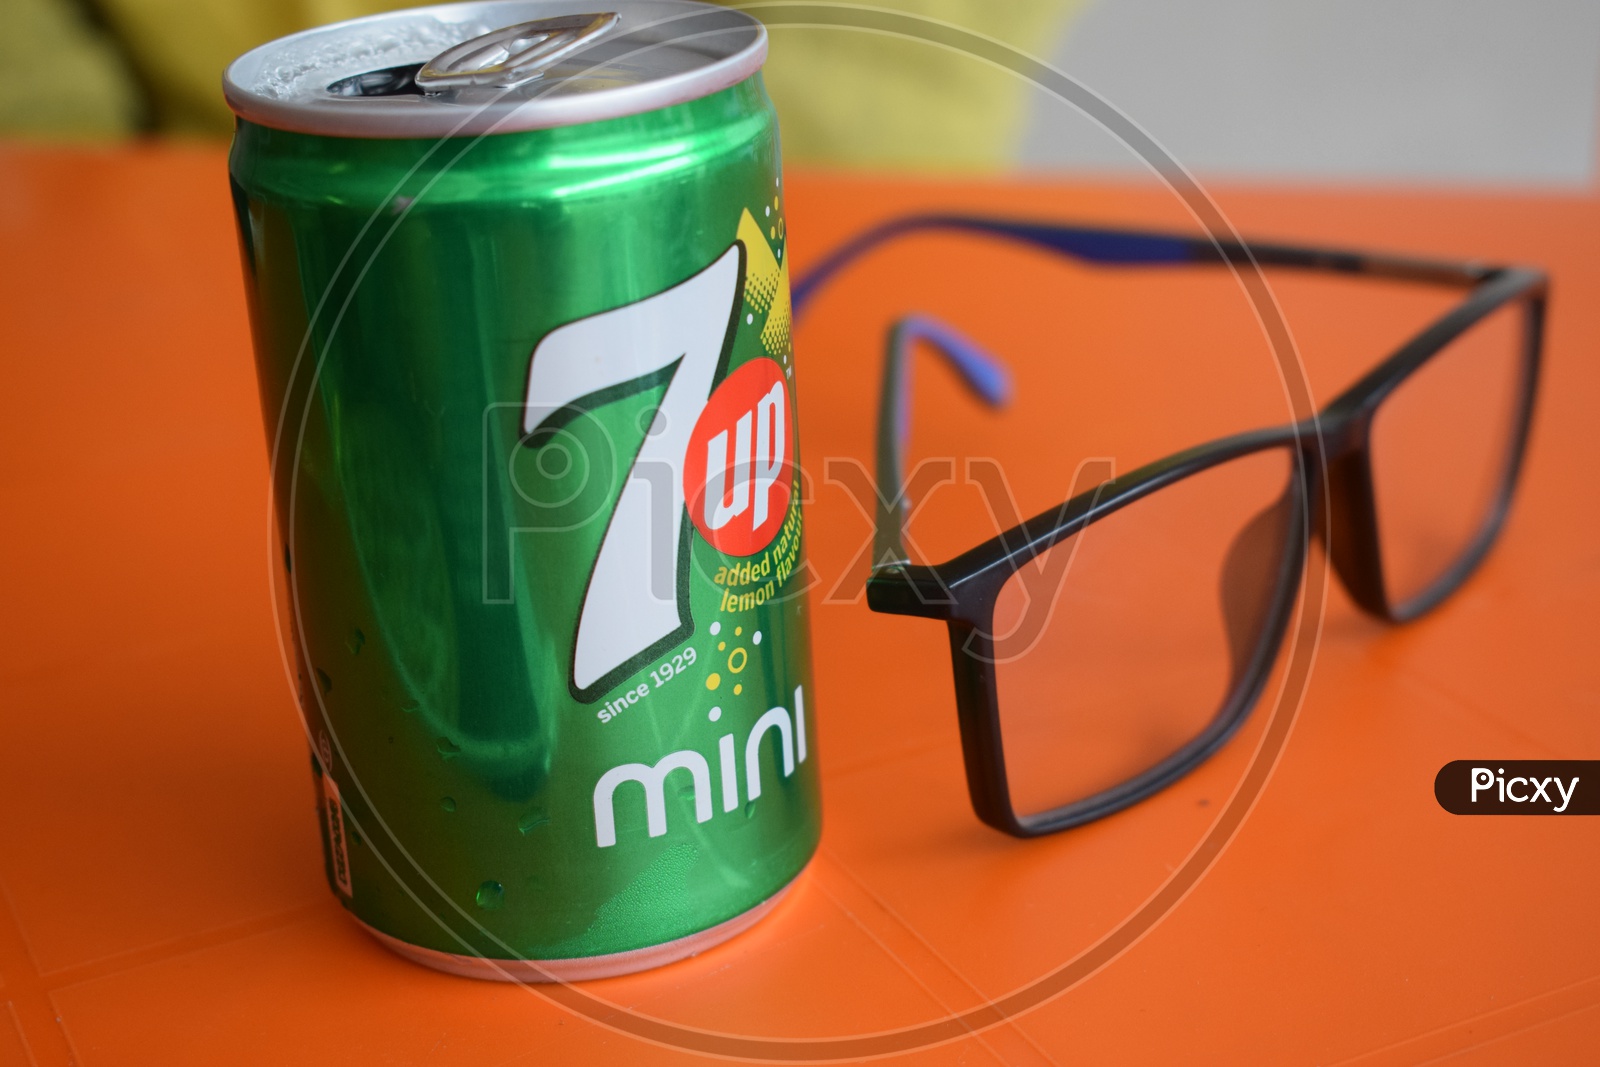 7up mini can